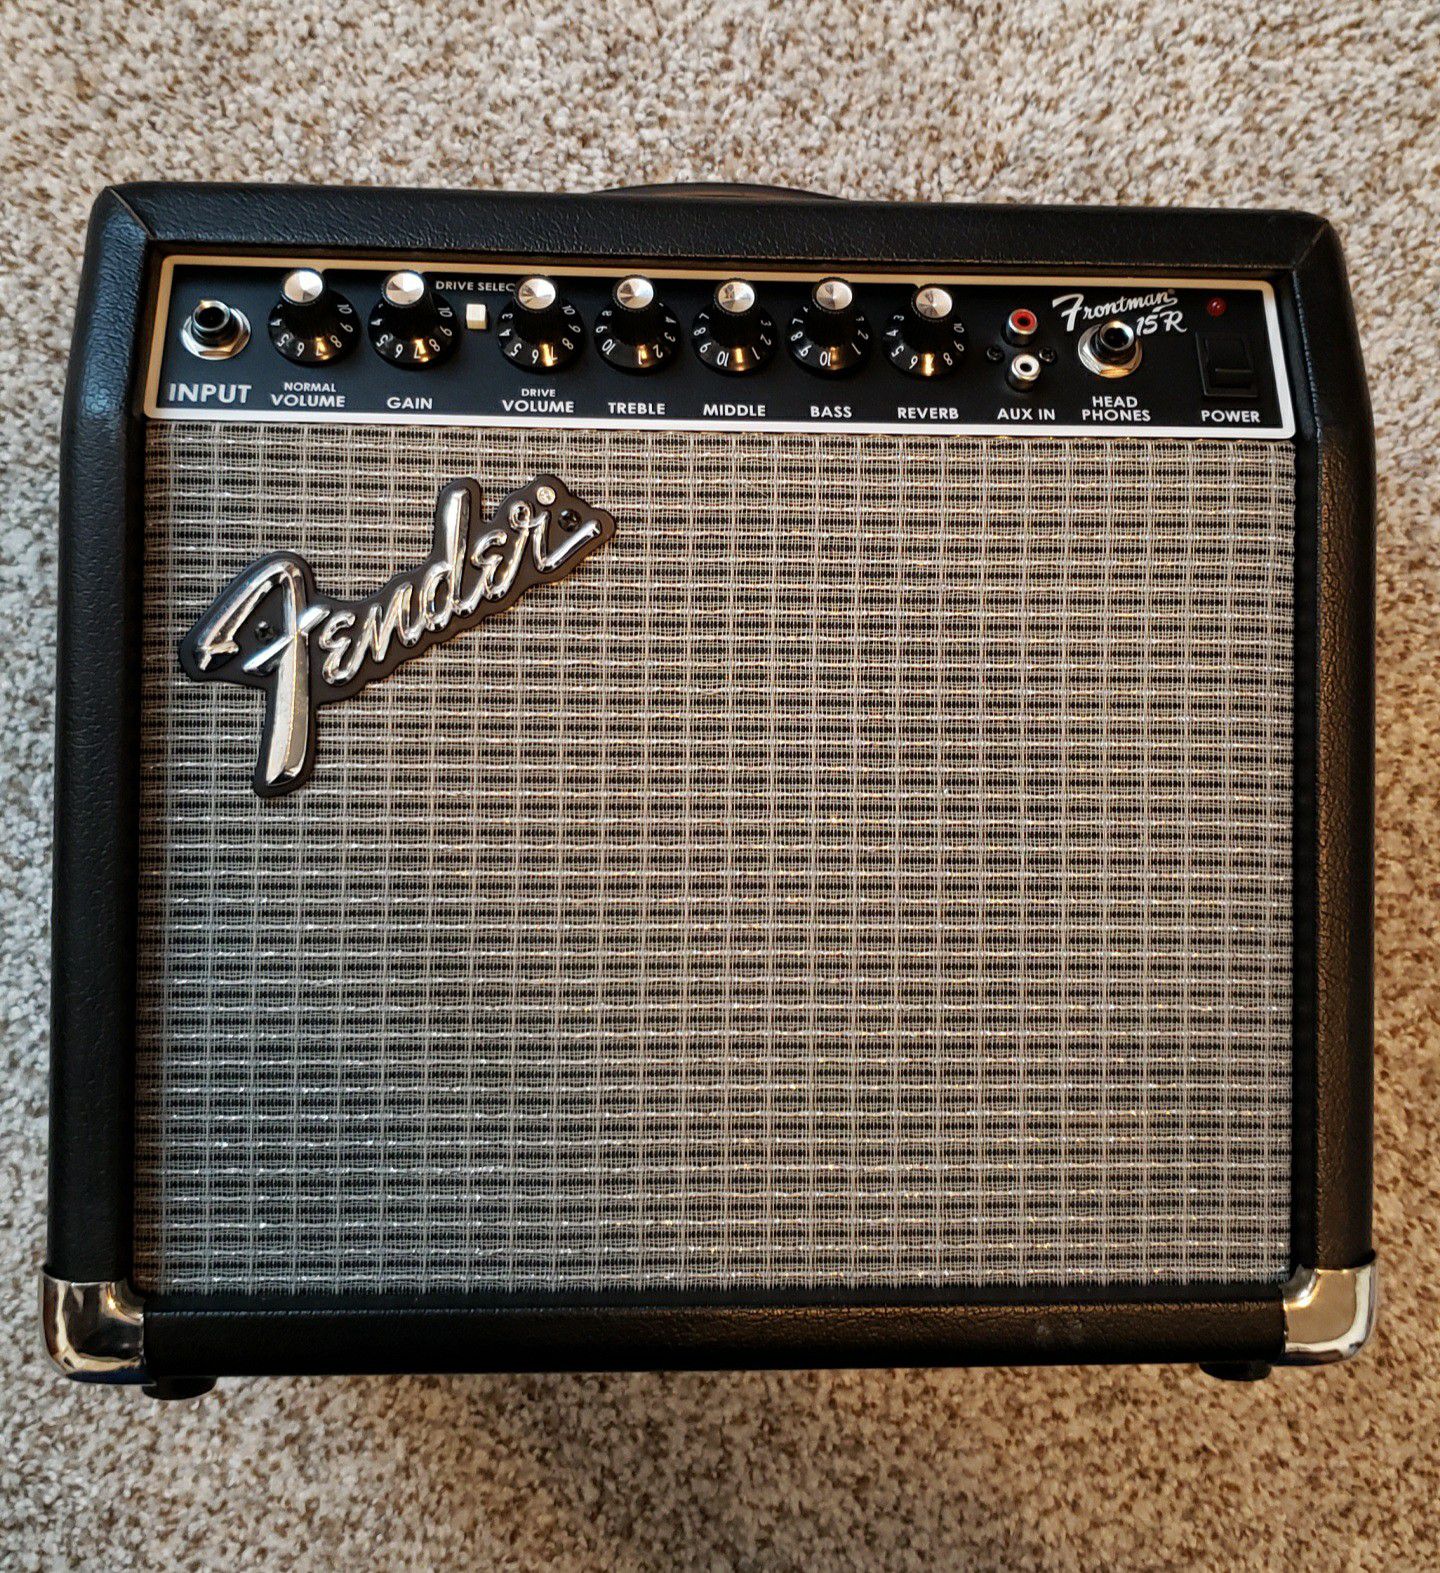 Fender Frontman 15R Guitar Amp with REVERB